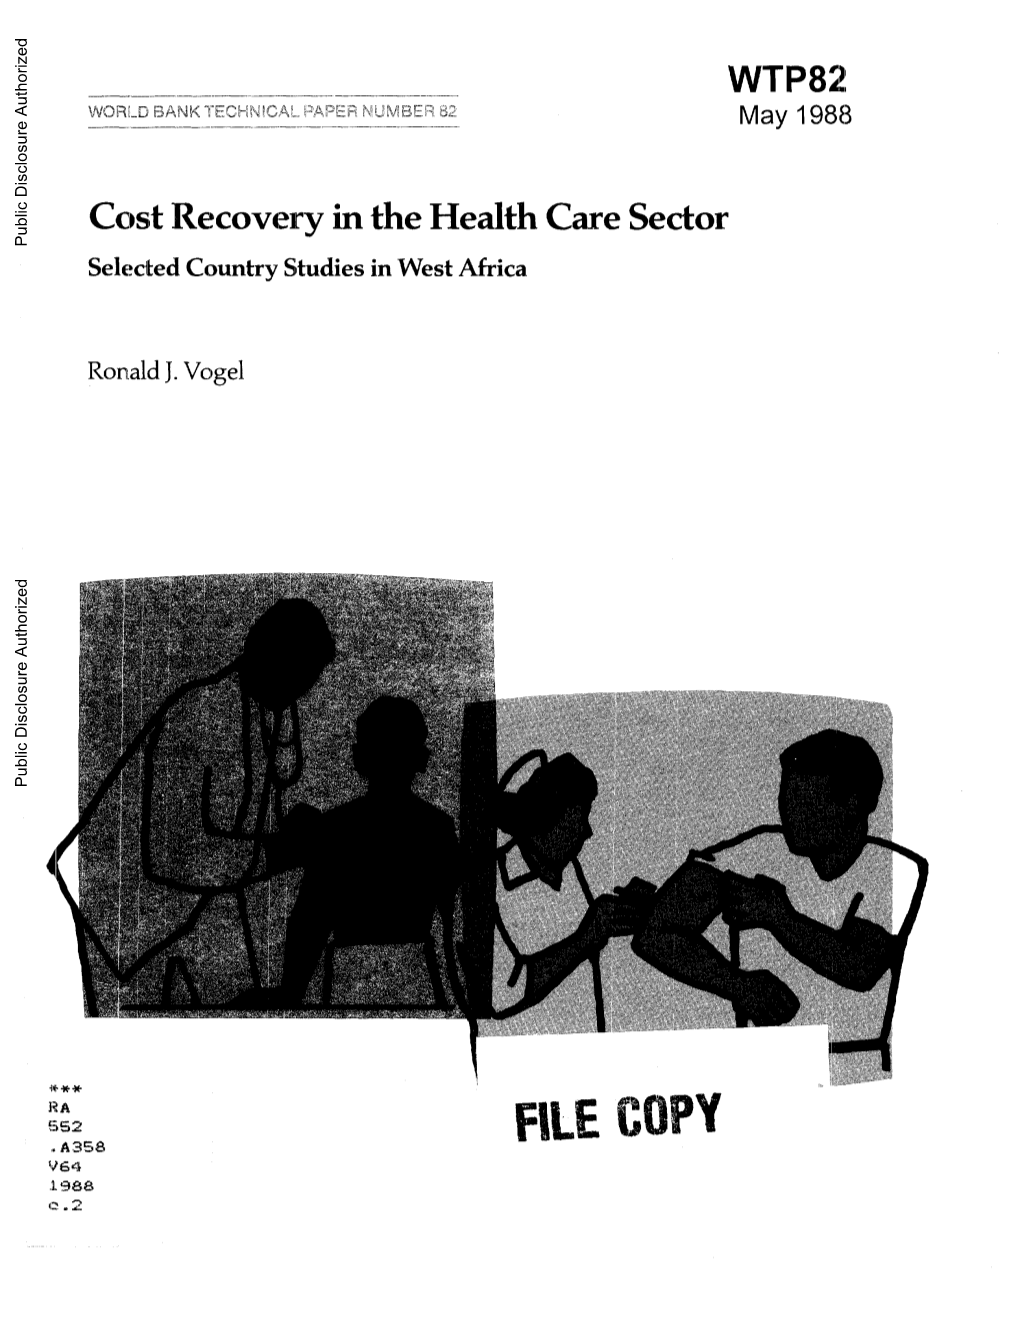 Cost Recovery in the Health Care Sector Public Disclosure Authorized Selected Country Studies in West Africa